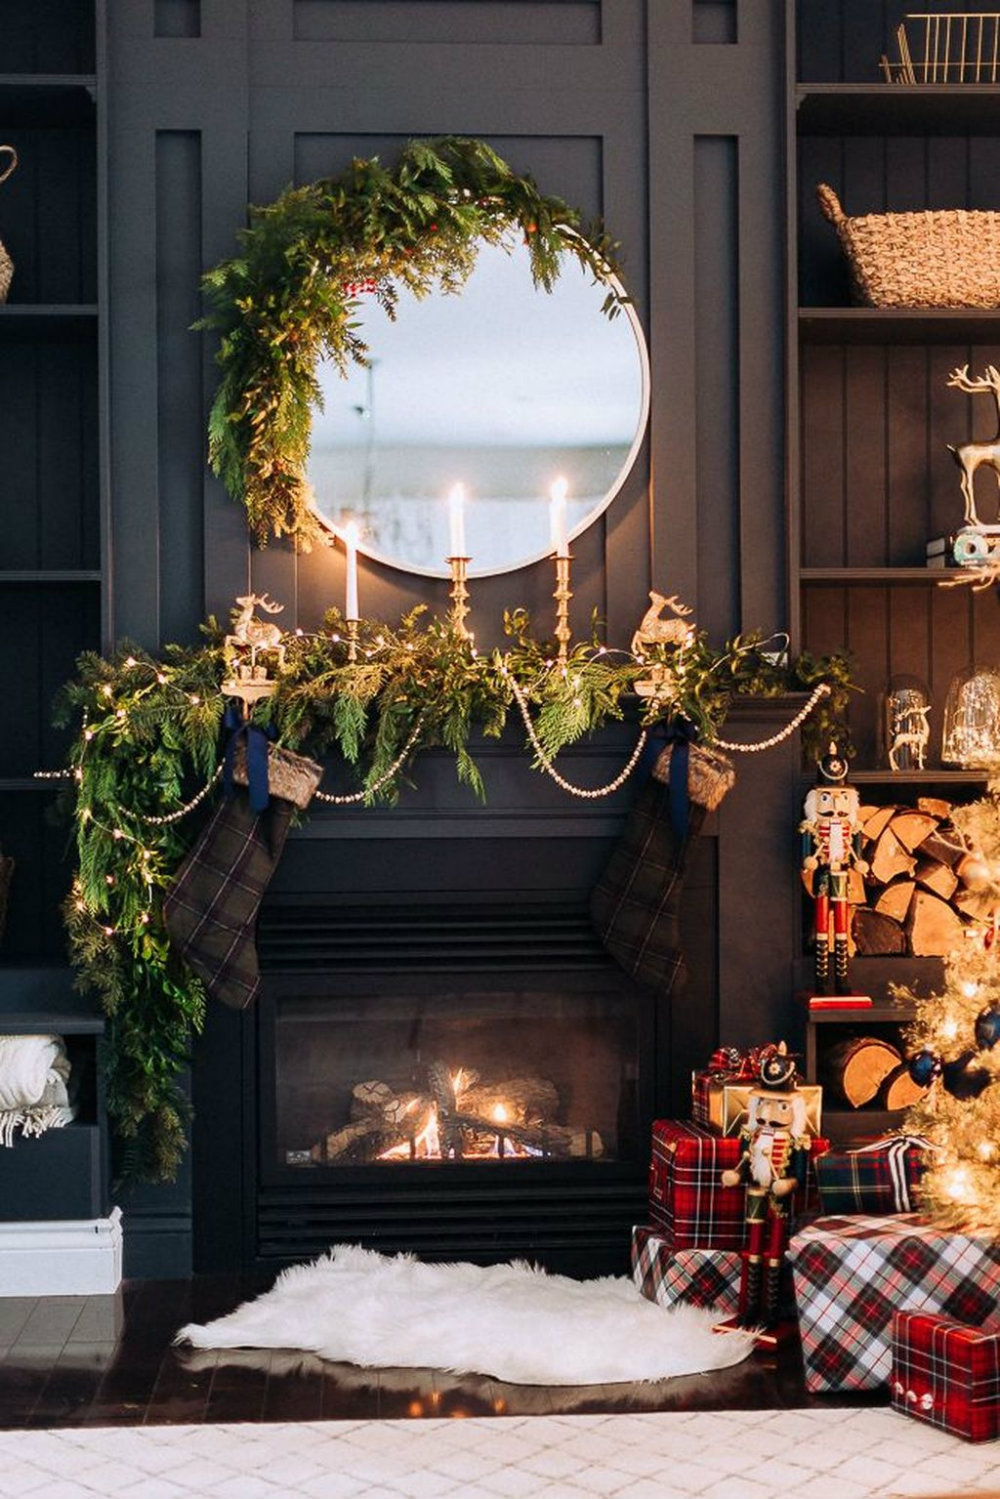 how to decorate your home for Christmas | Luxxu Blog